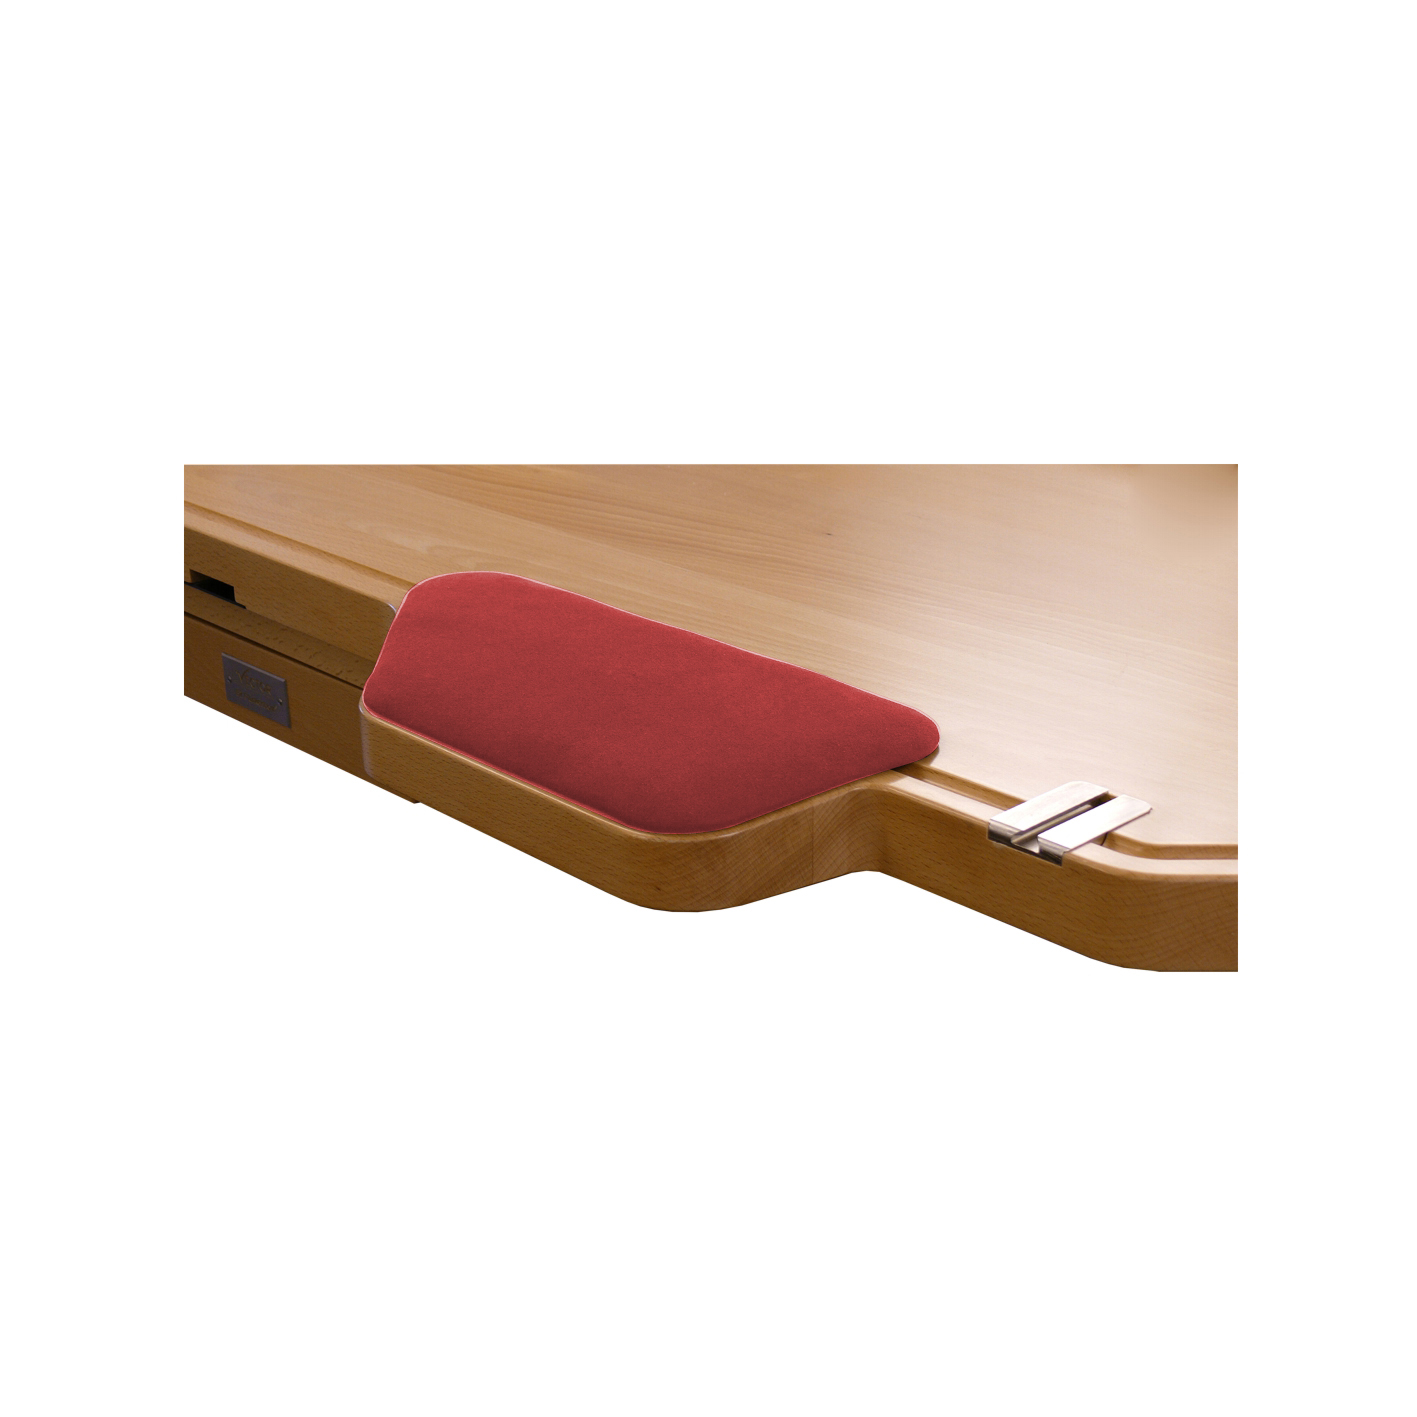 Amaretta support, padded, rust-red for fixed armrest Vector